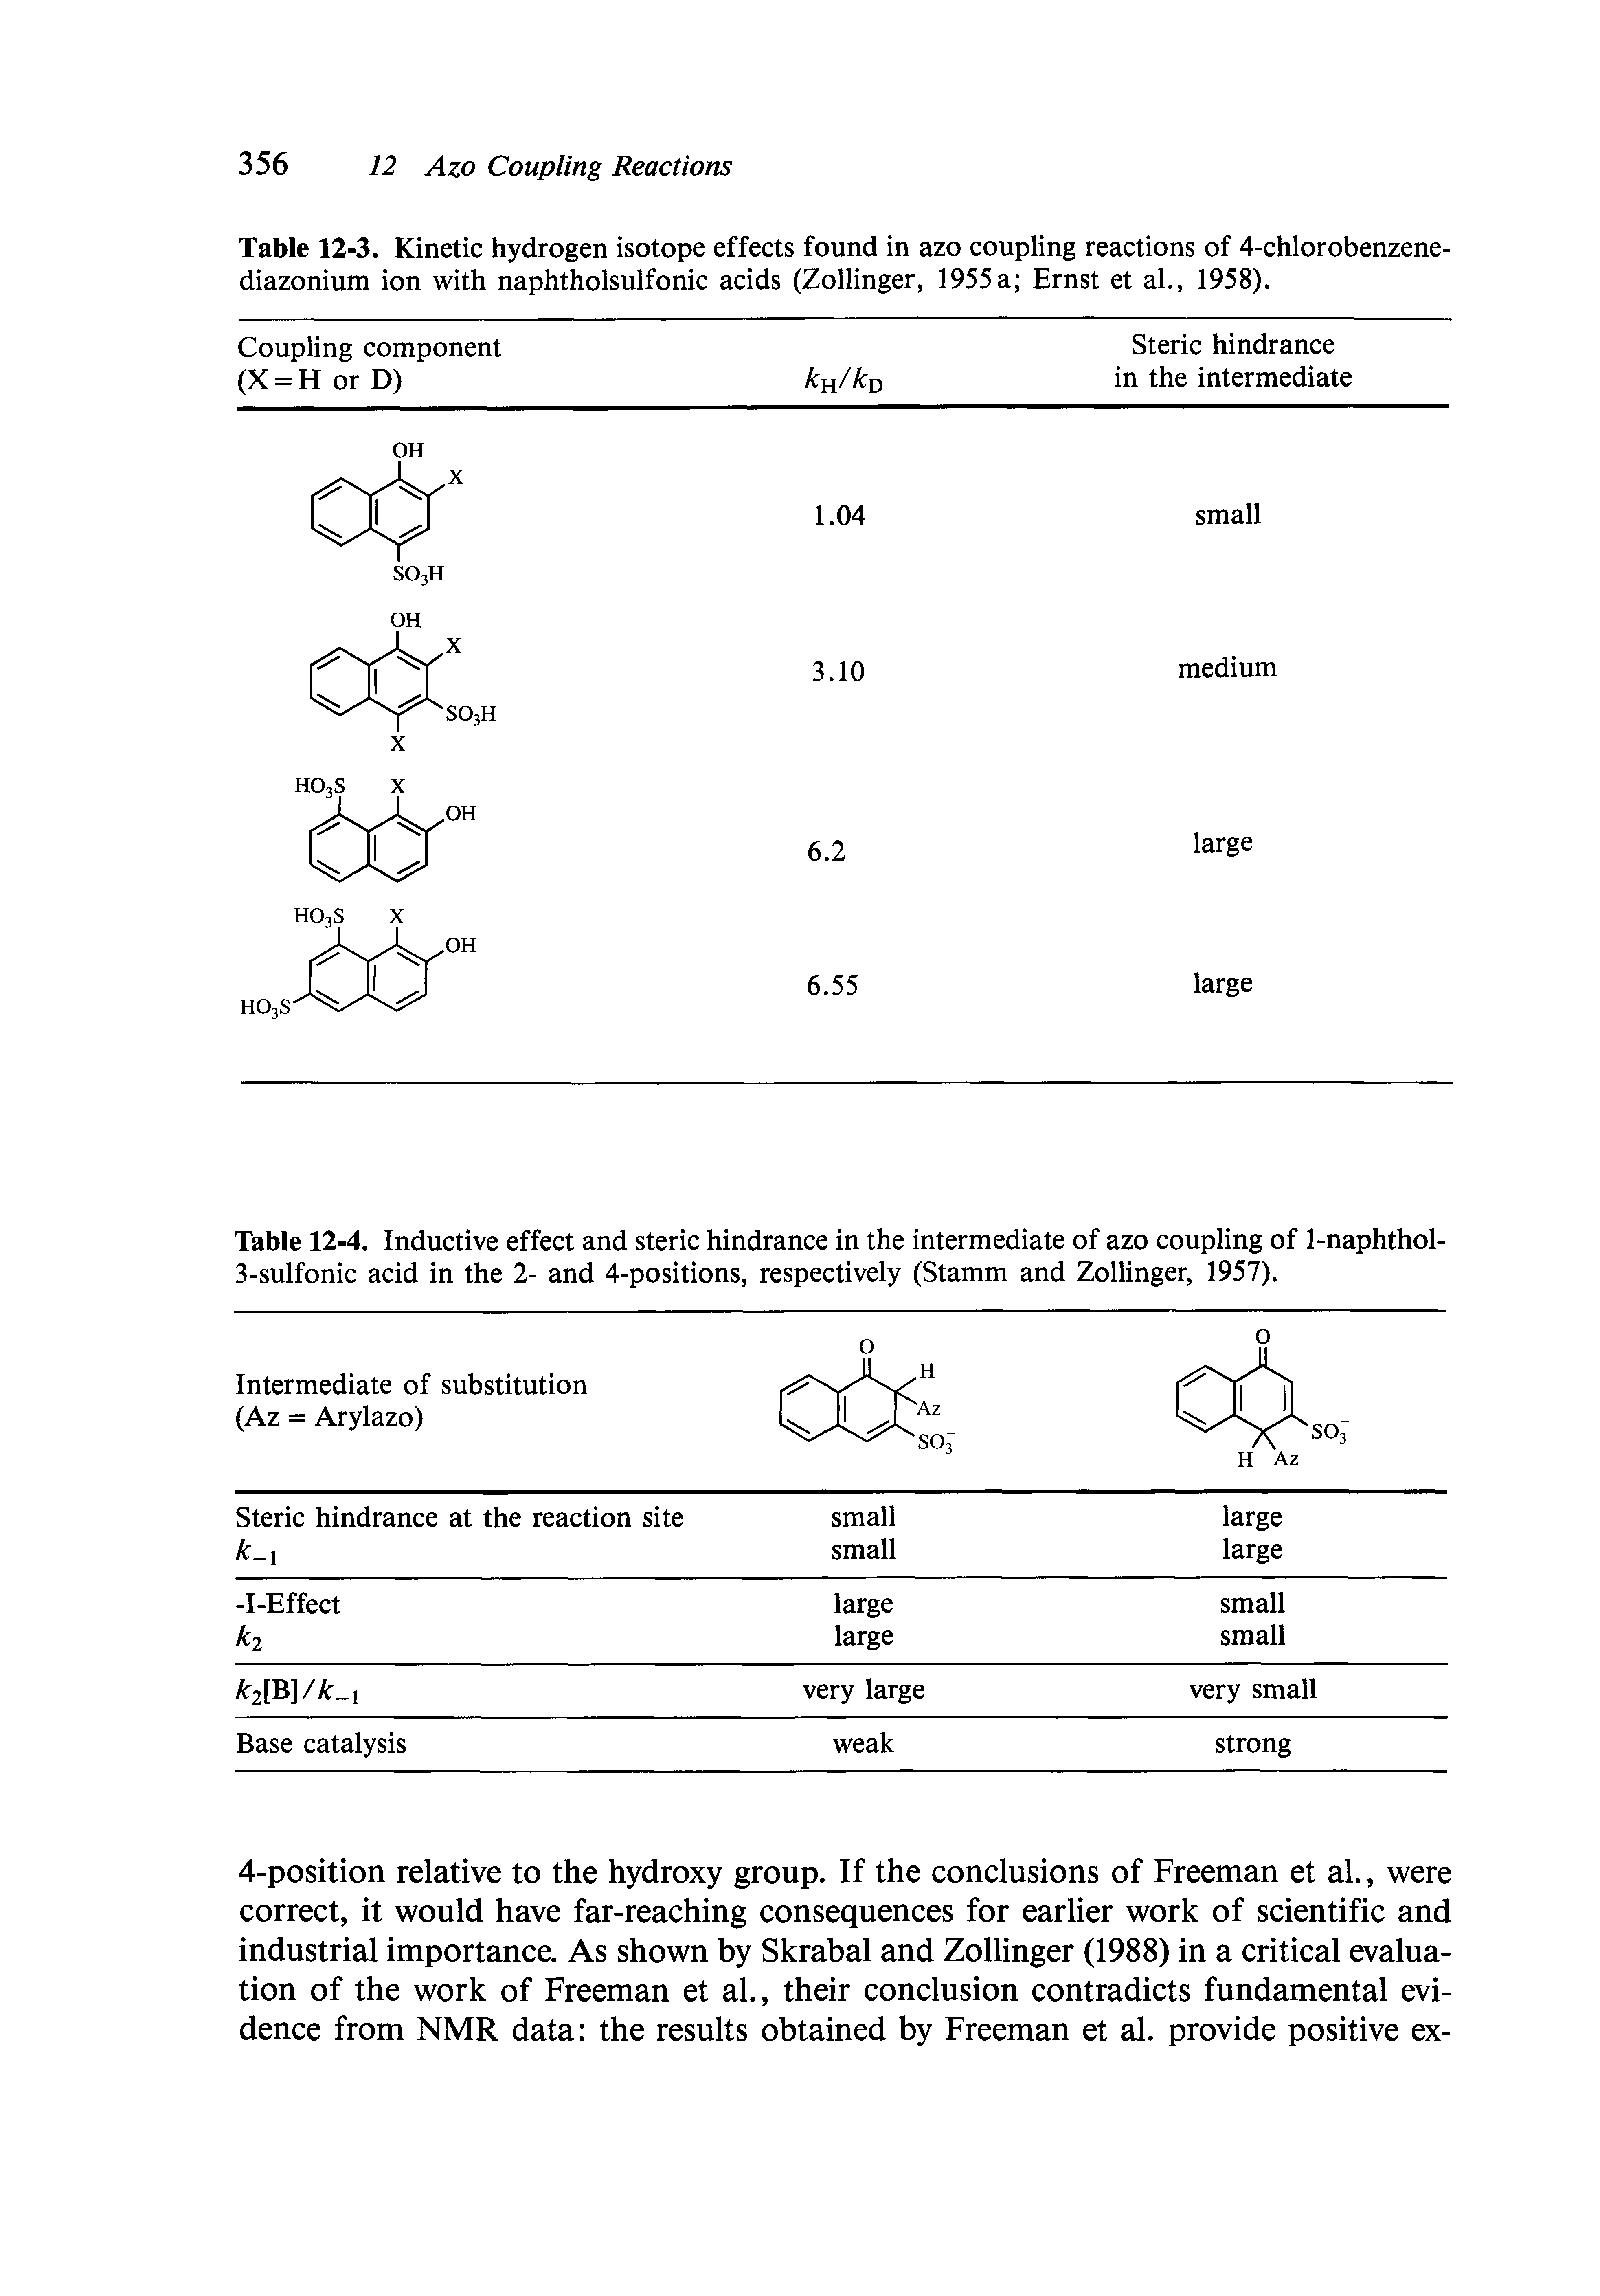 Table 12-4. Inductive effect and steric hindrance in the intermediate of azo coupling of 1-naphthol-3-sulfonic acid in the 2- and 4-positions, respectively (Stamm and Zollinger, 1957).